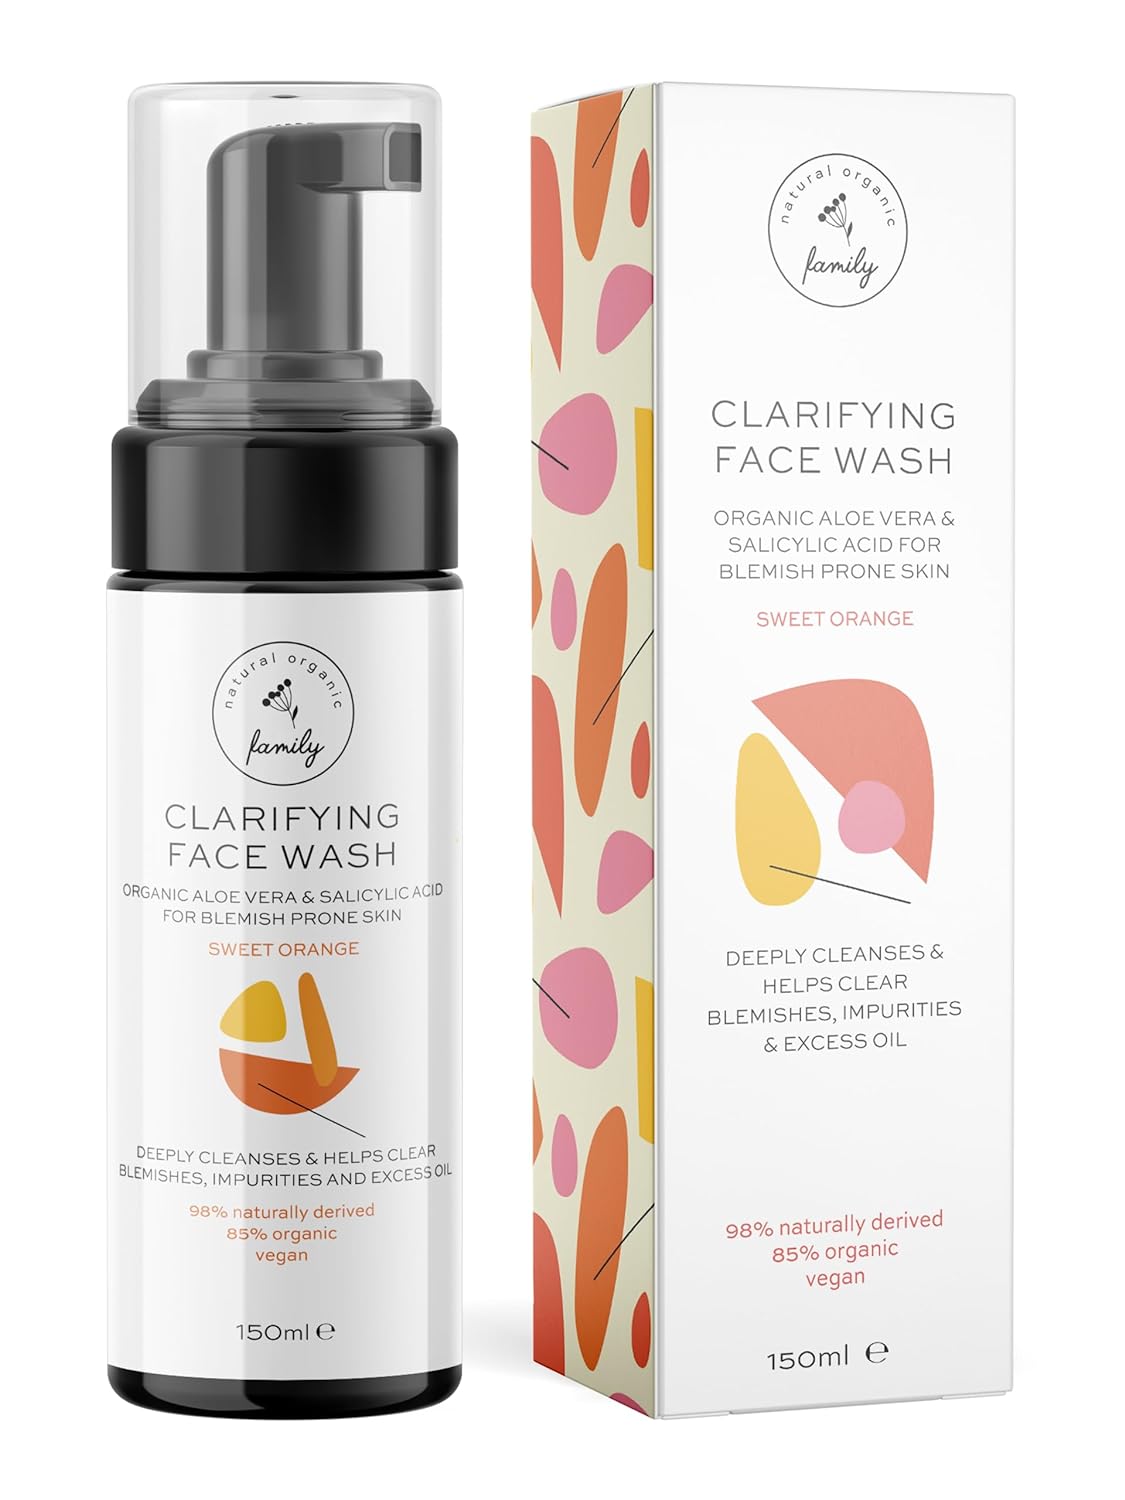 The Natural and Organic Family Clarifying Face Wash with Salicylic Acid - Facial Cleanser for Oily, Normal, and Combination Skin - Exfoliating, Pore Minimizing Formula for Teens